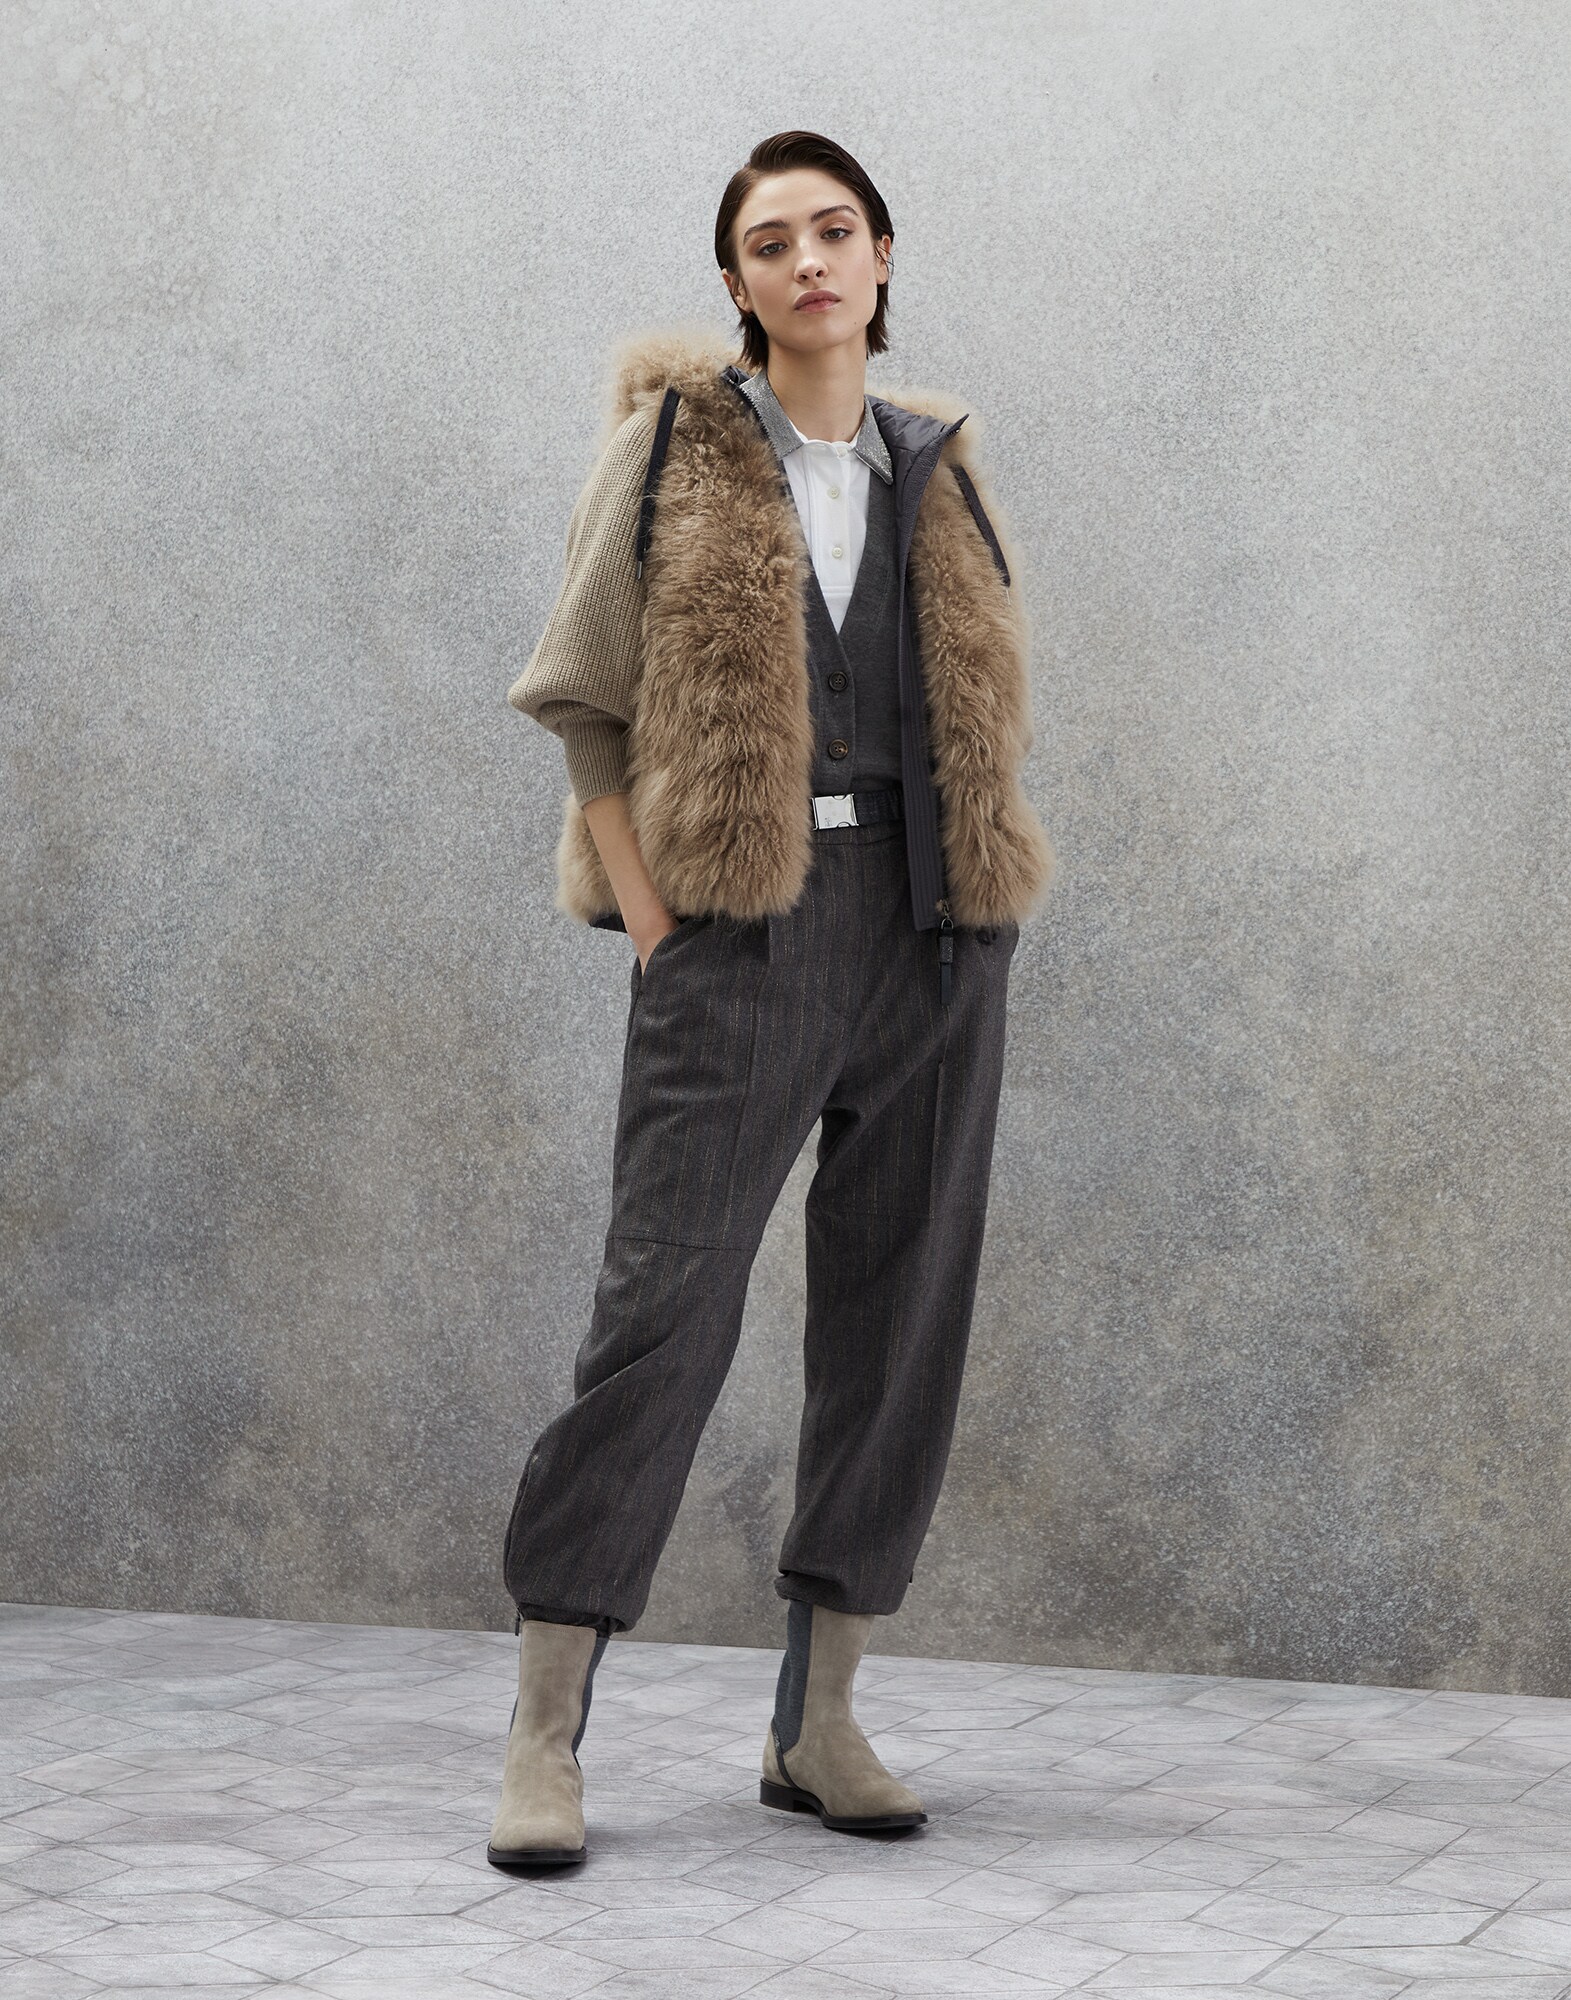 Women's outfits | Shop by Look | Brunello Cucinelli